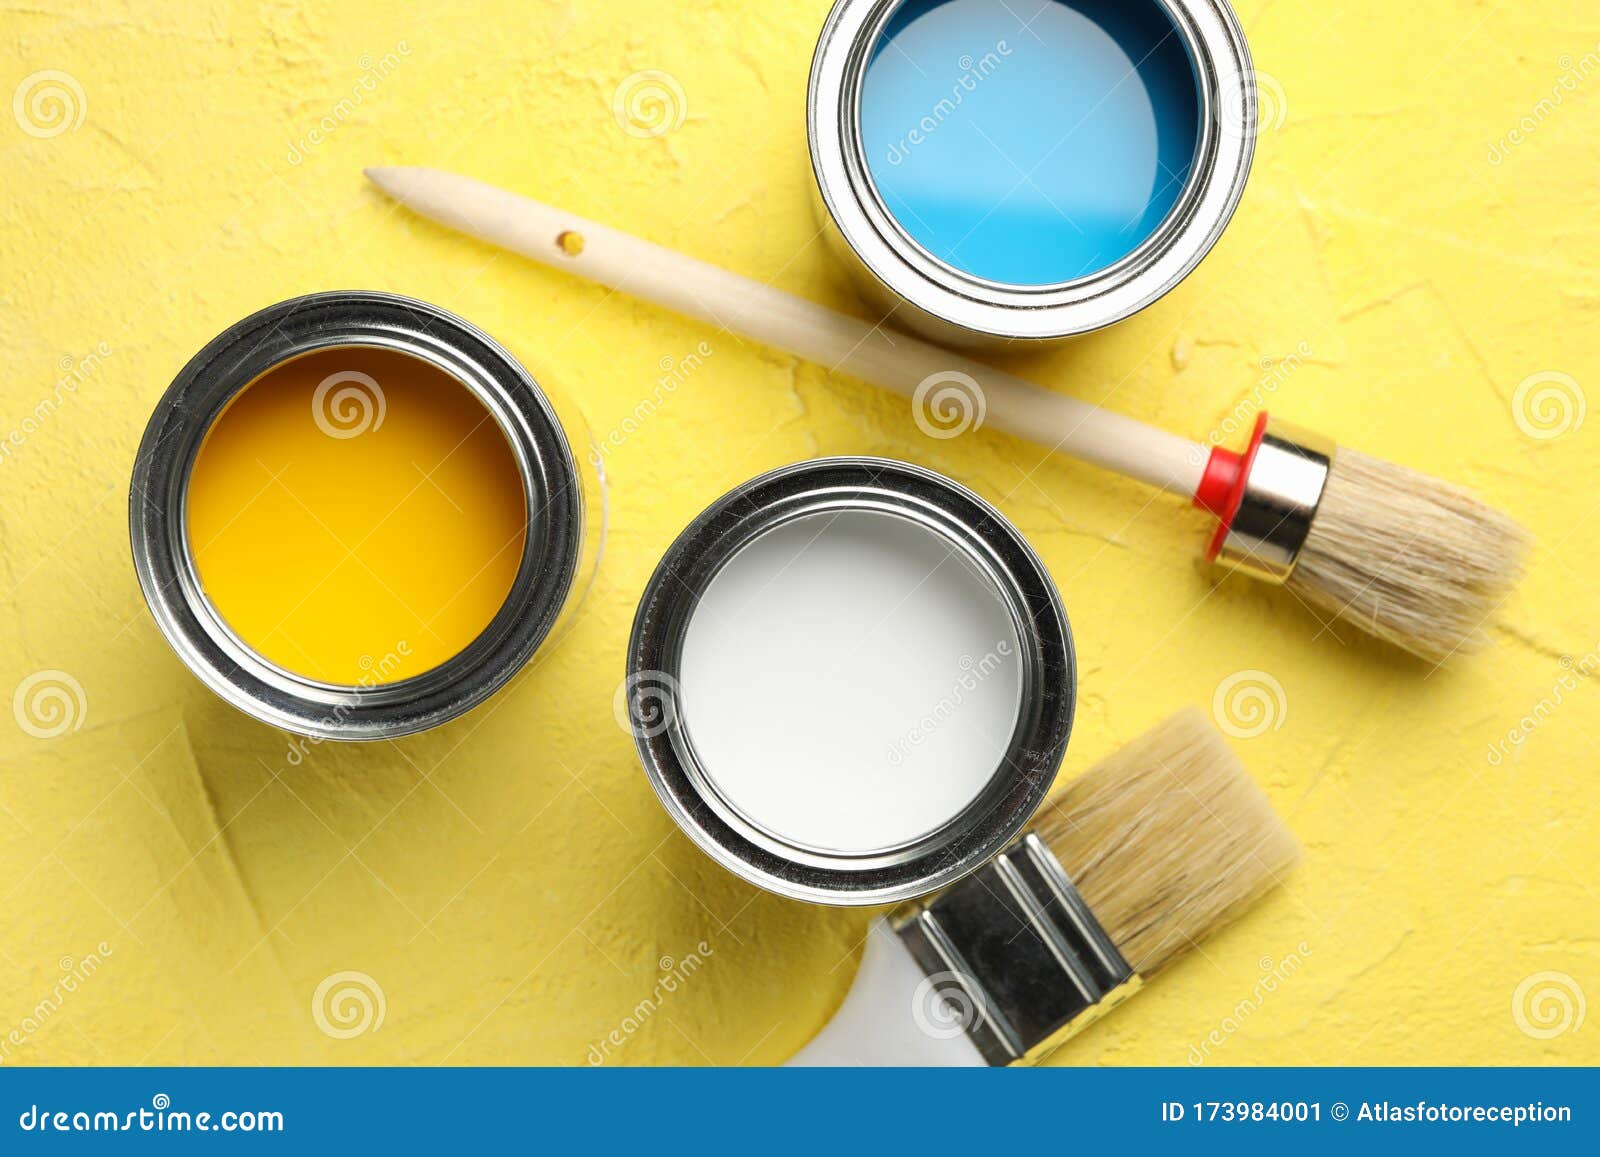 Paint Cans and Brushes on Background, Top View Stock Image - Image of ...